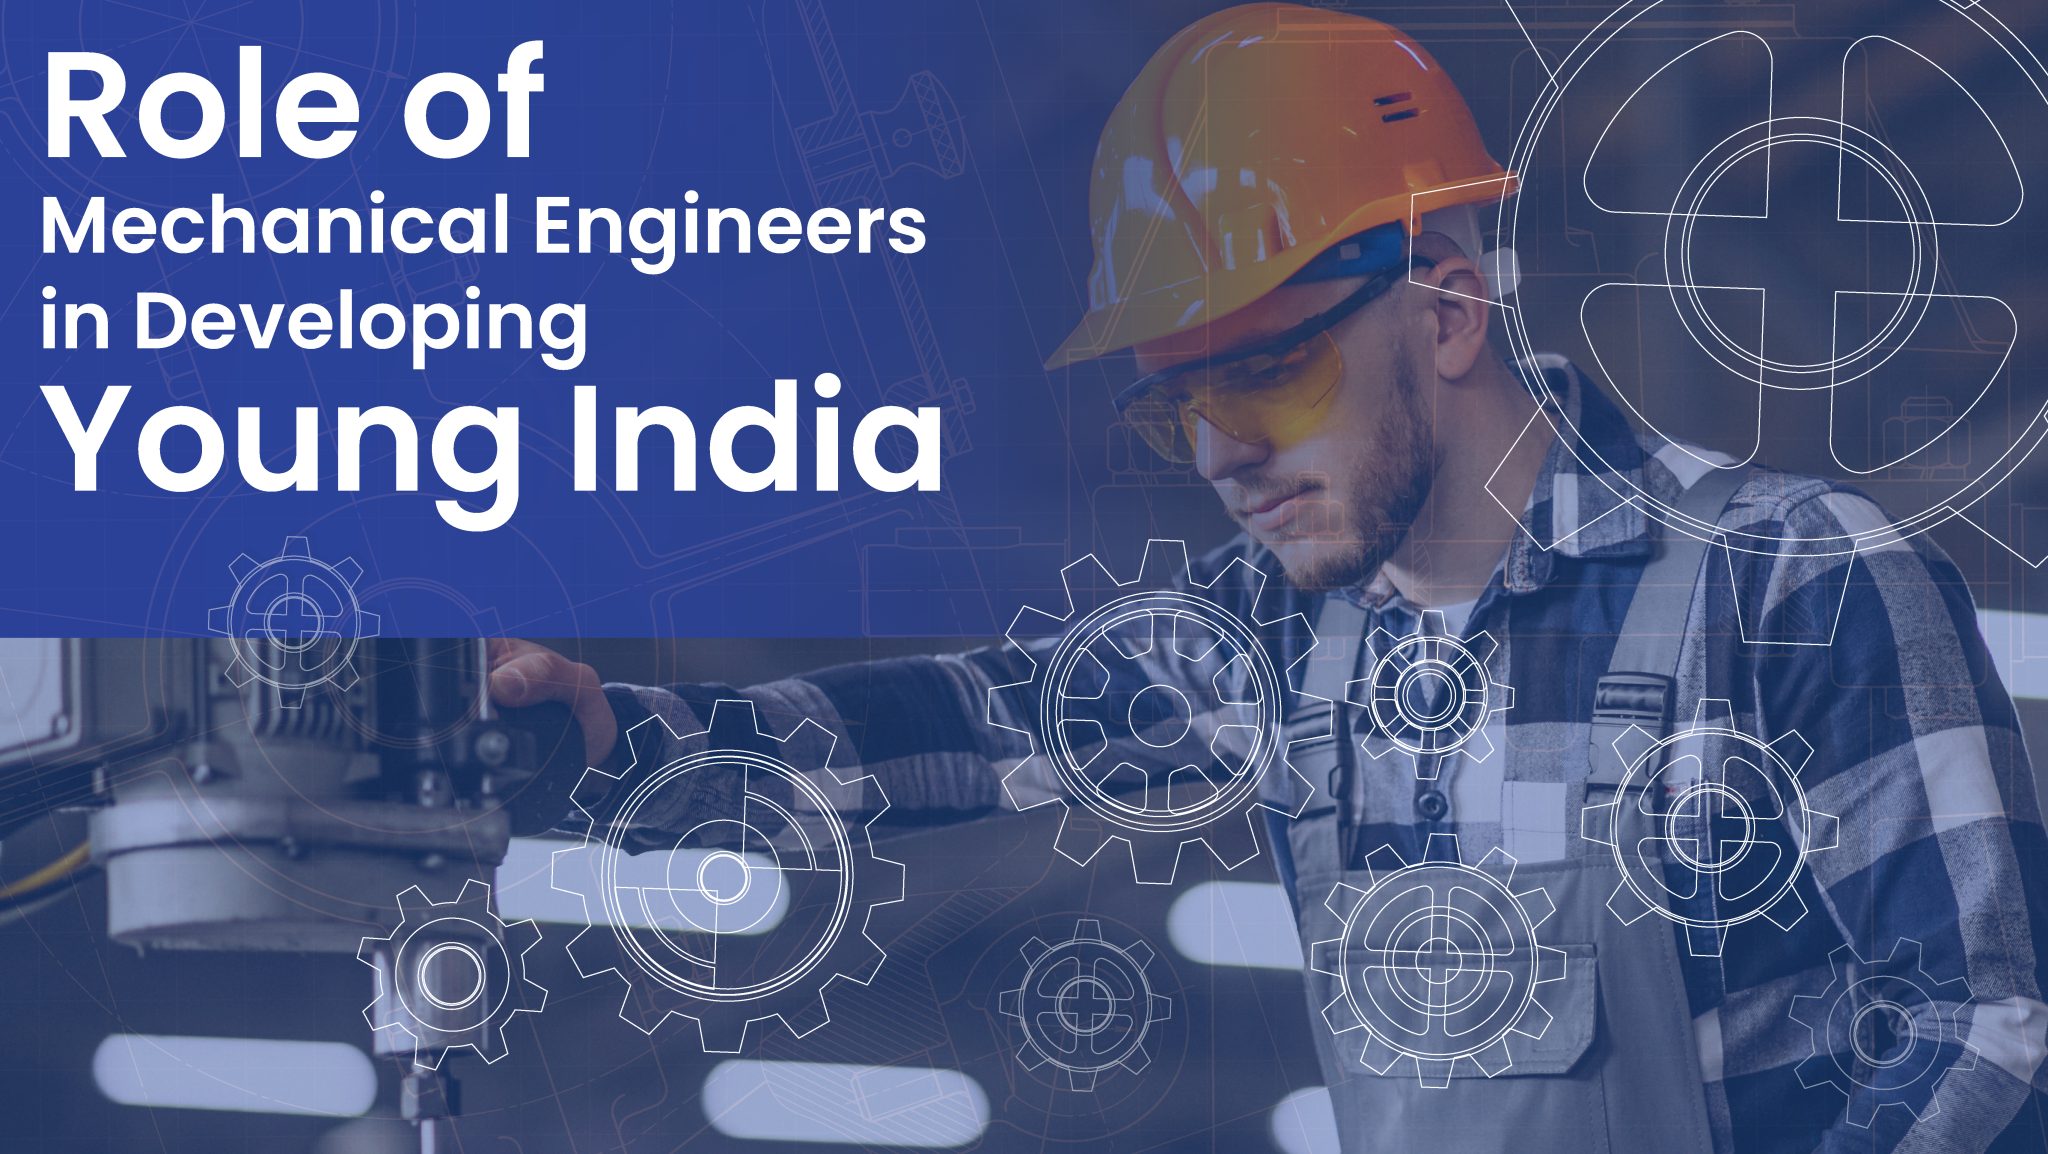 Role of Mechanical Engineers in Developing Young India